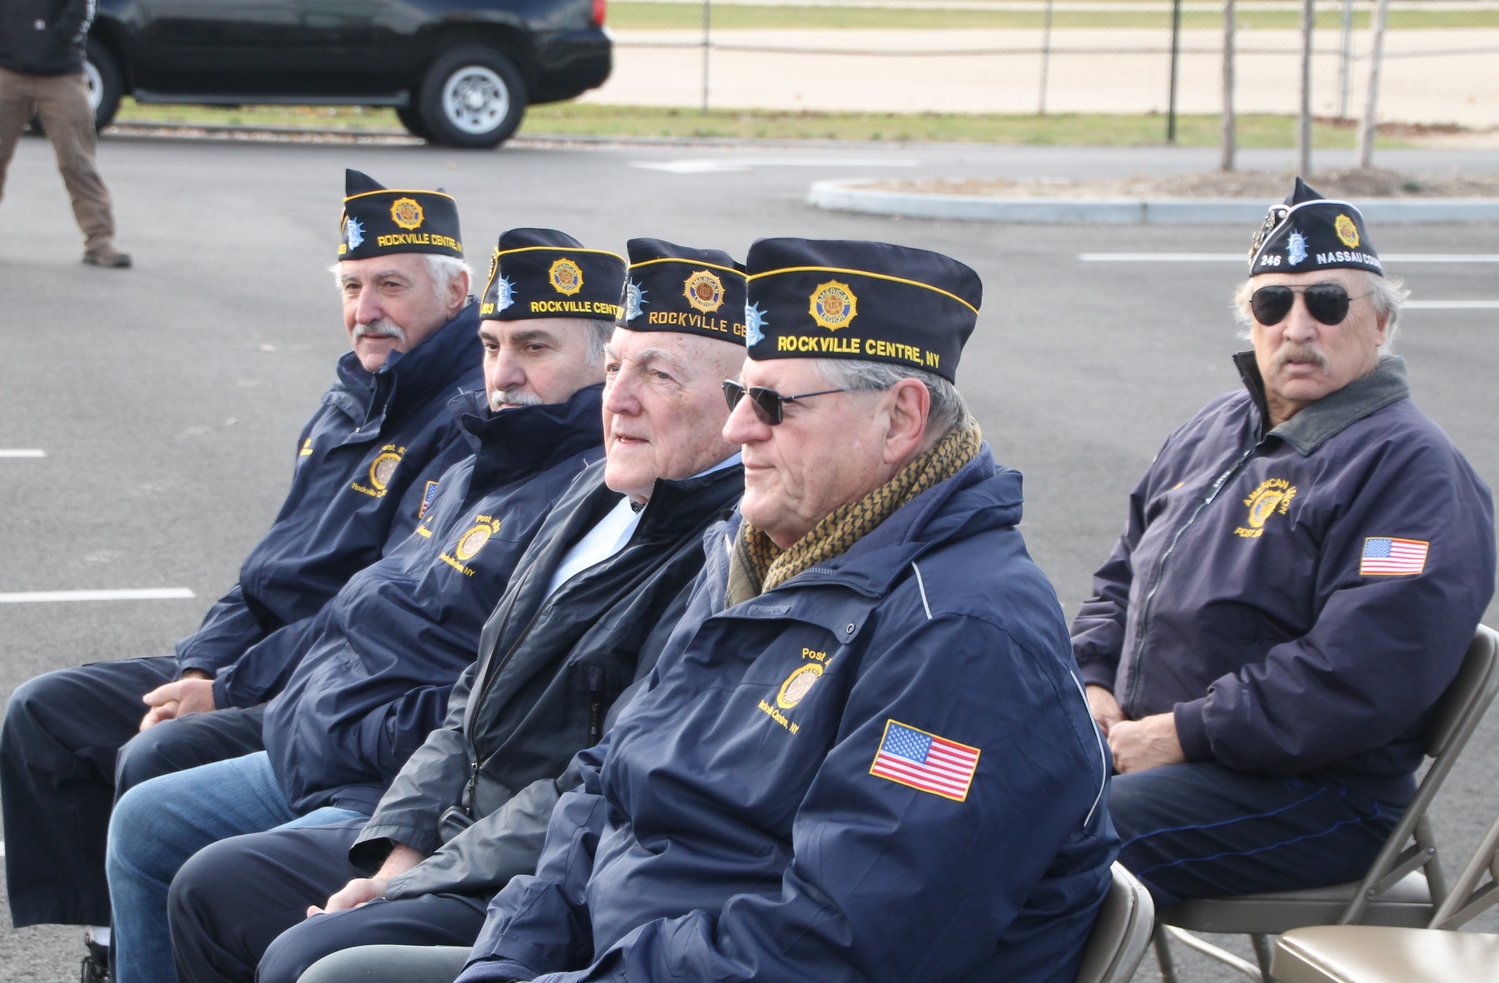 Rockville Centre and Malverne American Legion members also attended